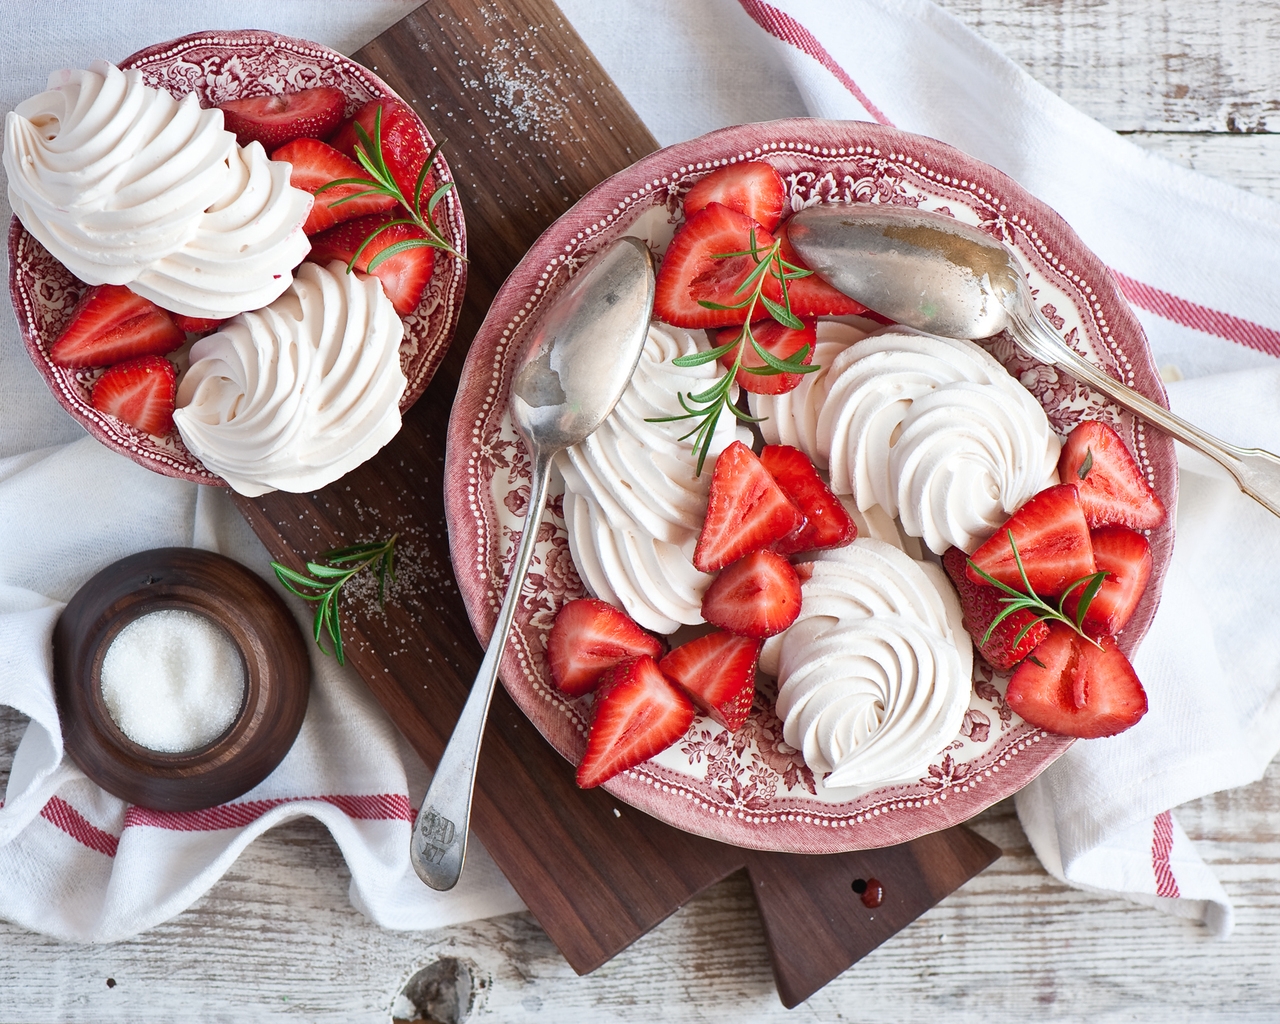 Meringues and Strawberries Dessert for 1280 x 1024 resolution